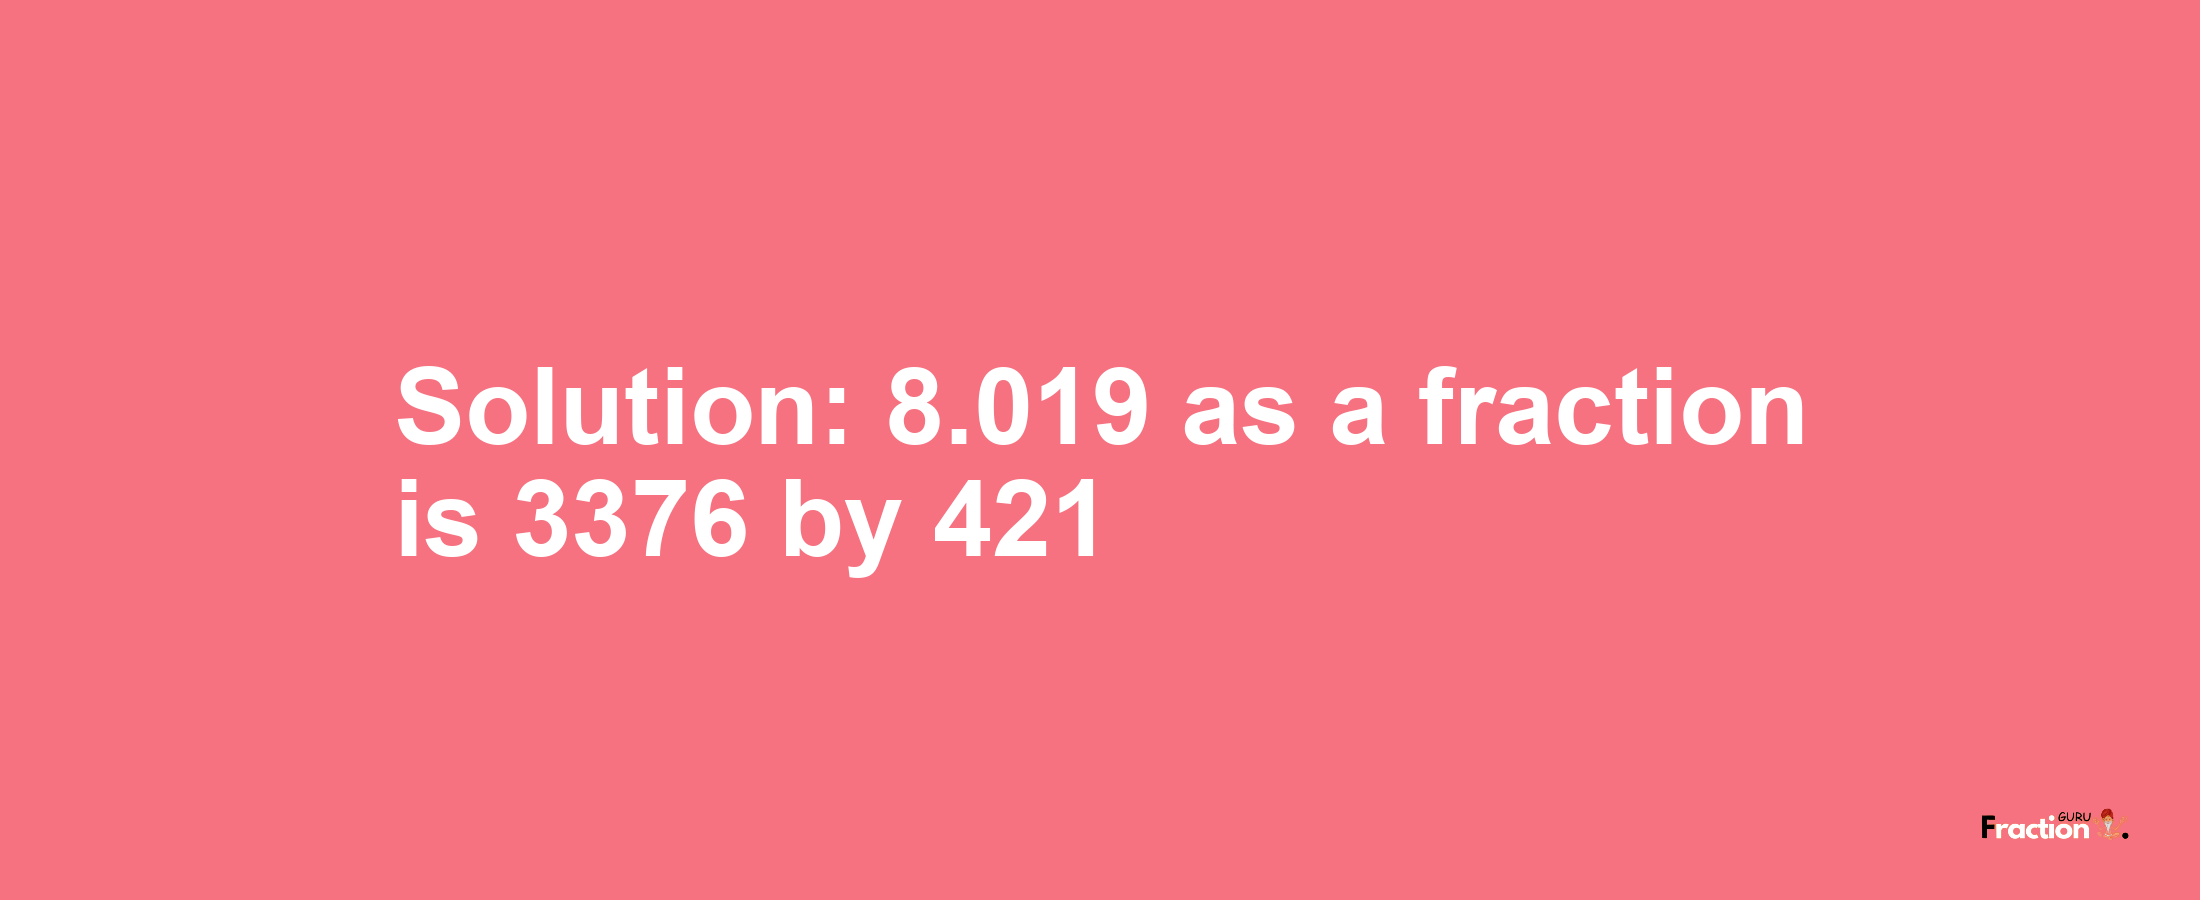 Solution:8.019 as a fraction is 3376/421